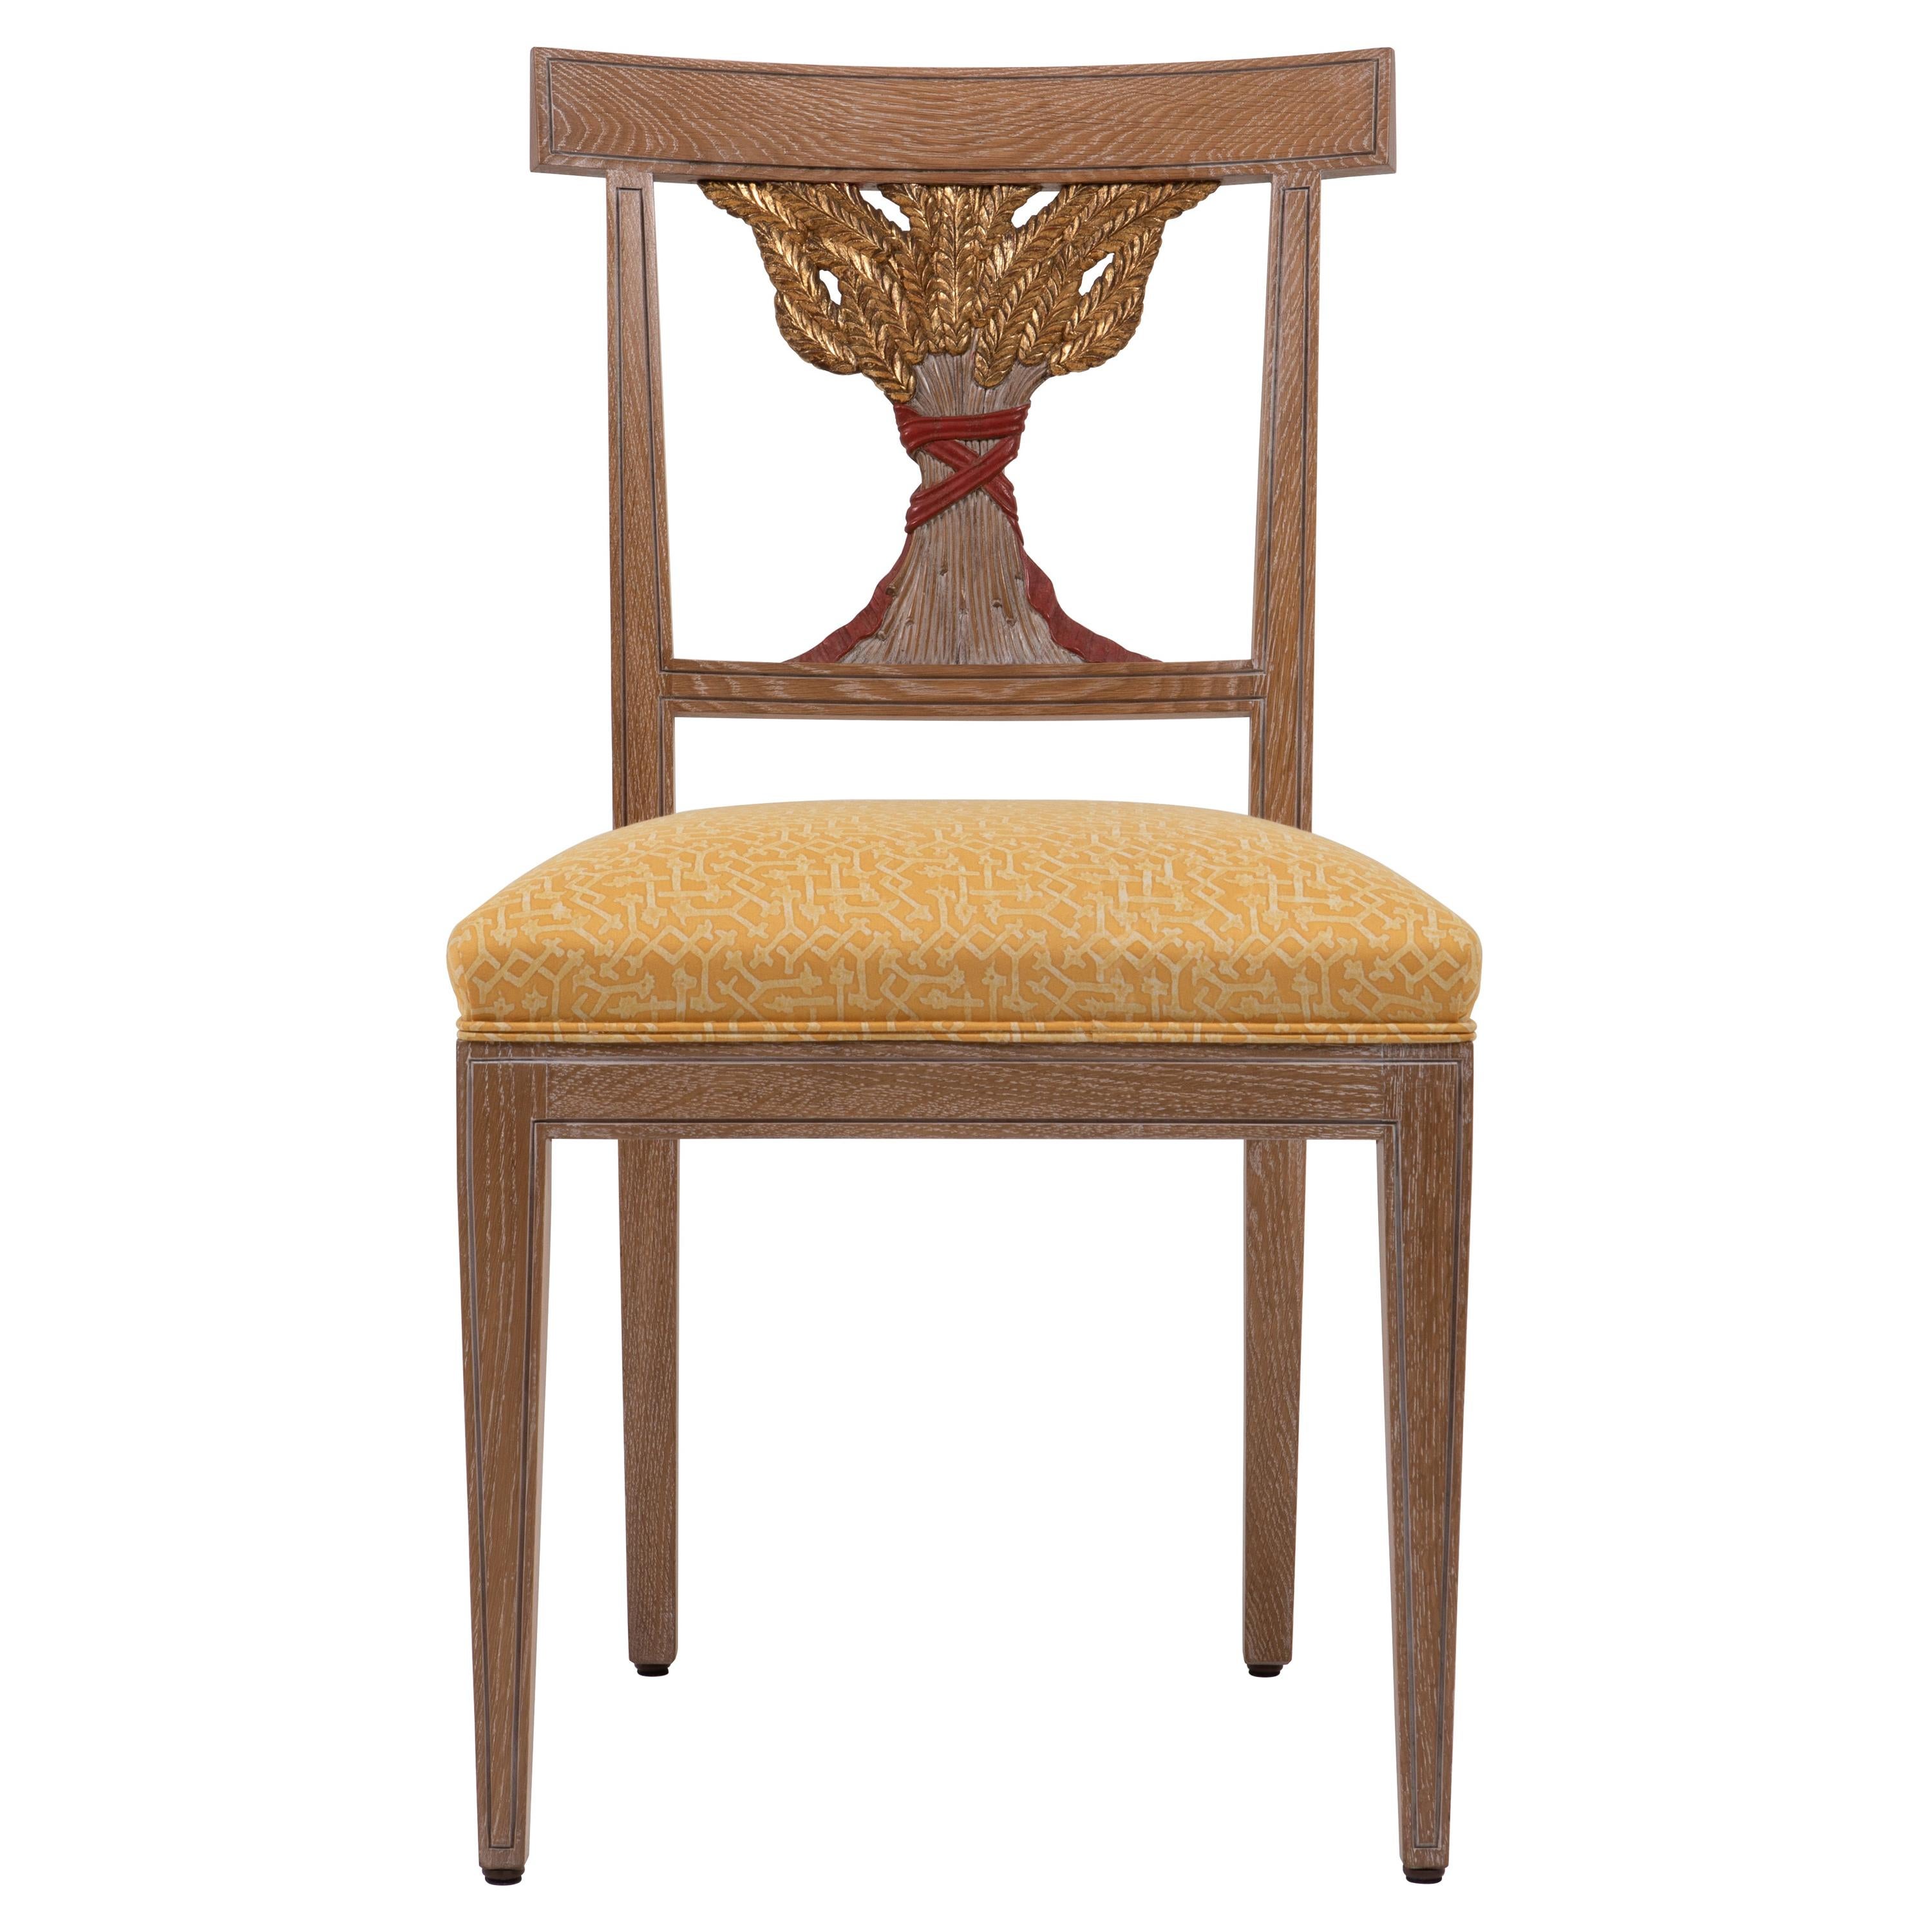 Oak Dining Chair with Decorative Ears of Wheat Hand Carved, Made in Italy